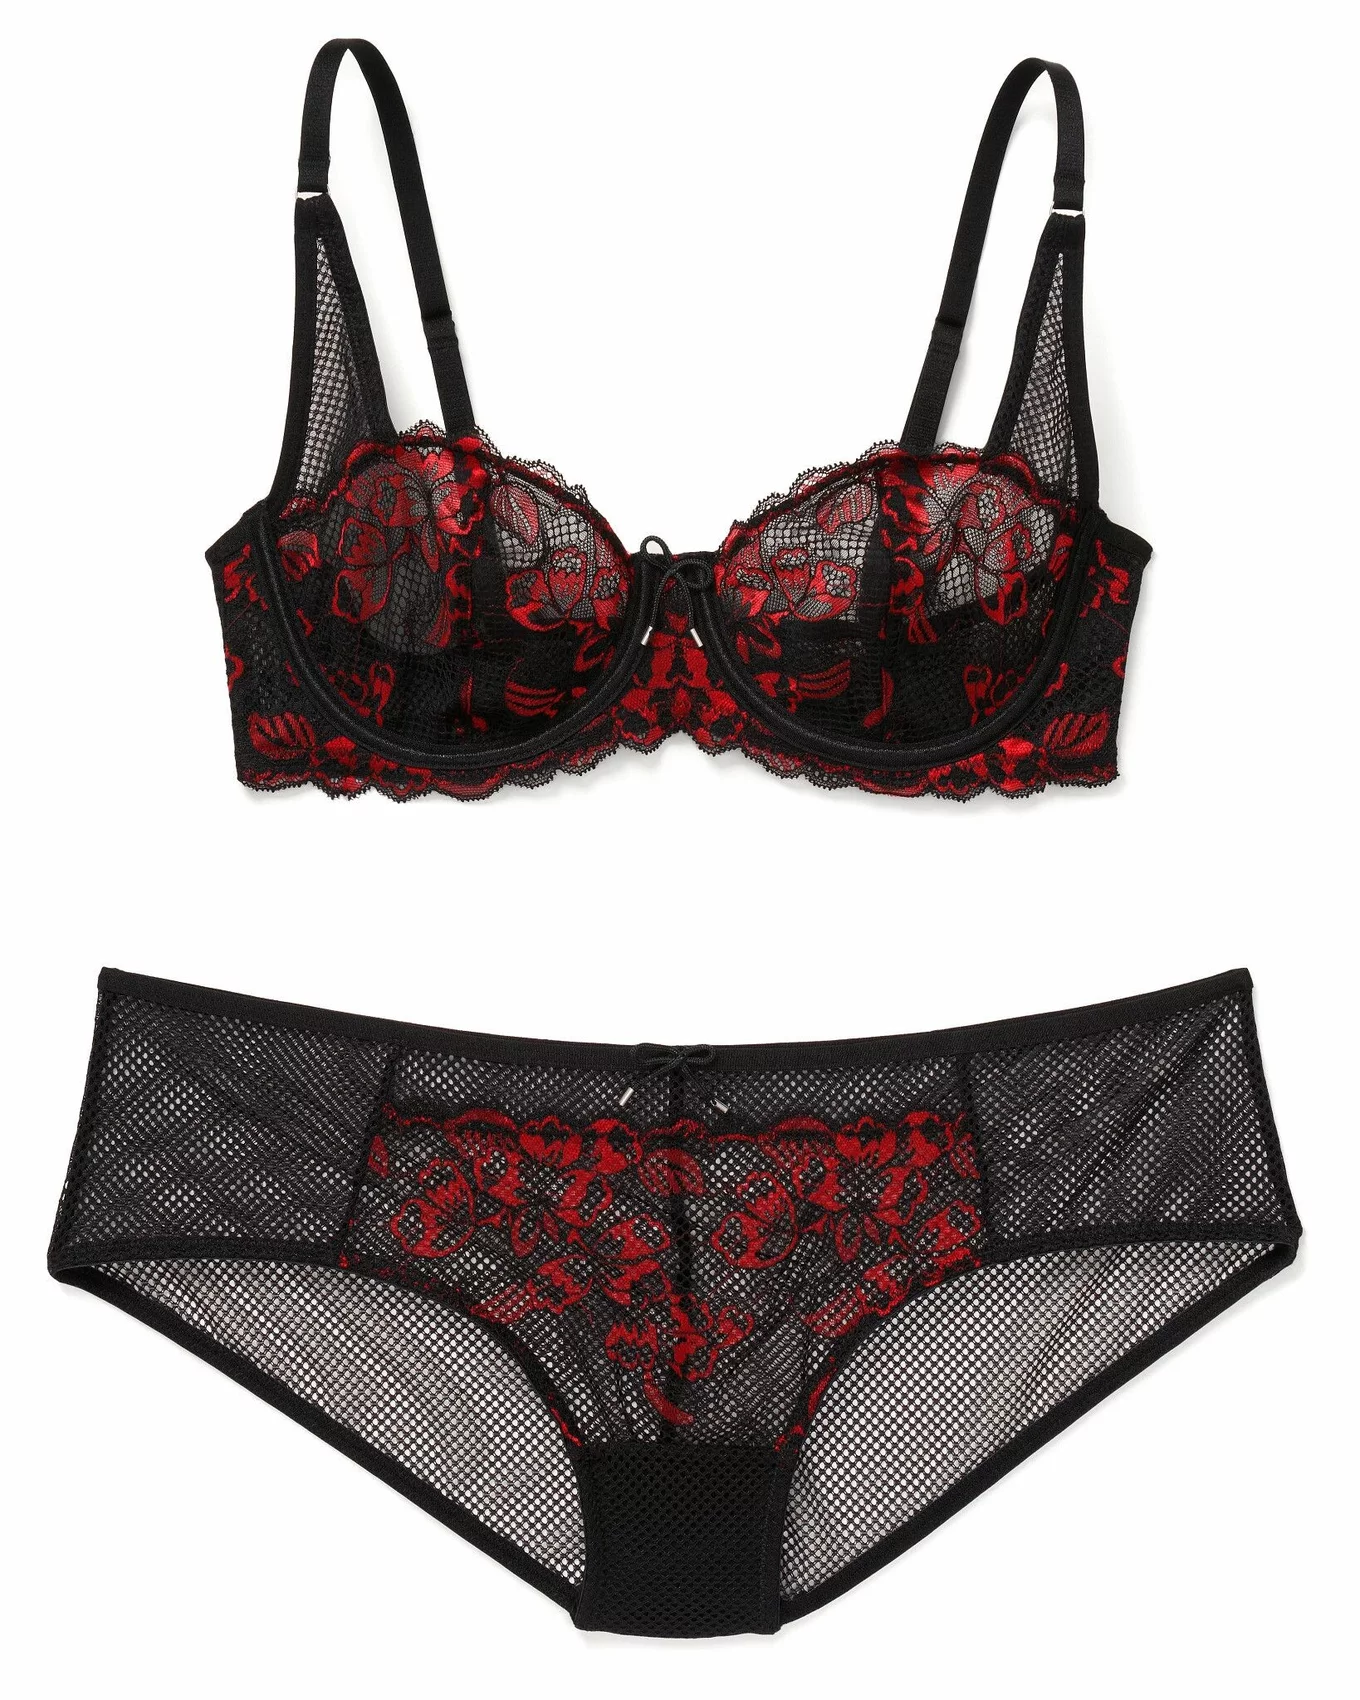 Robyn Black Unlined Balconette, 32A-38C